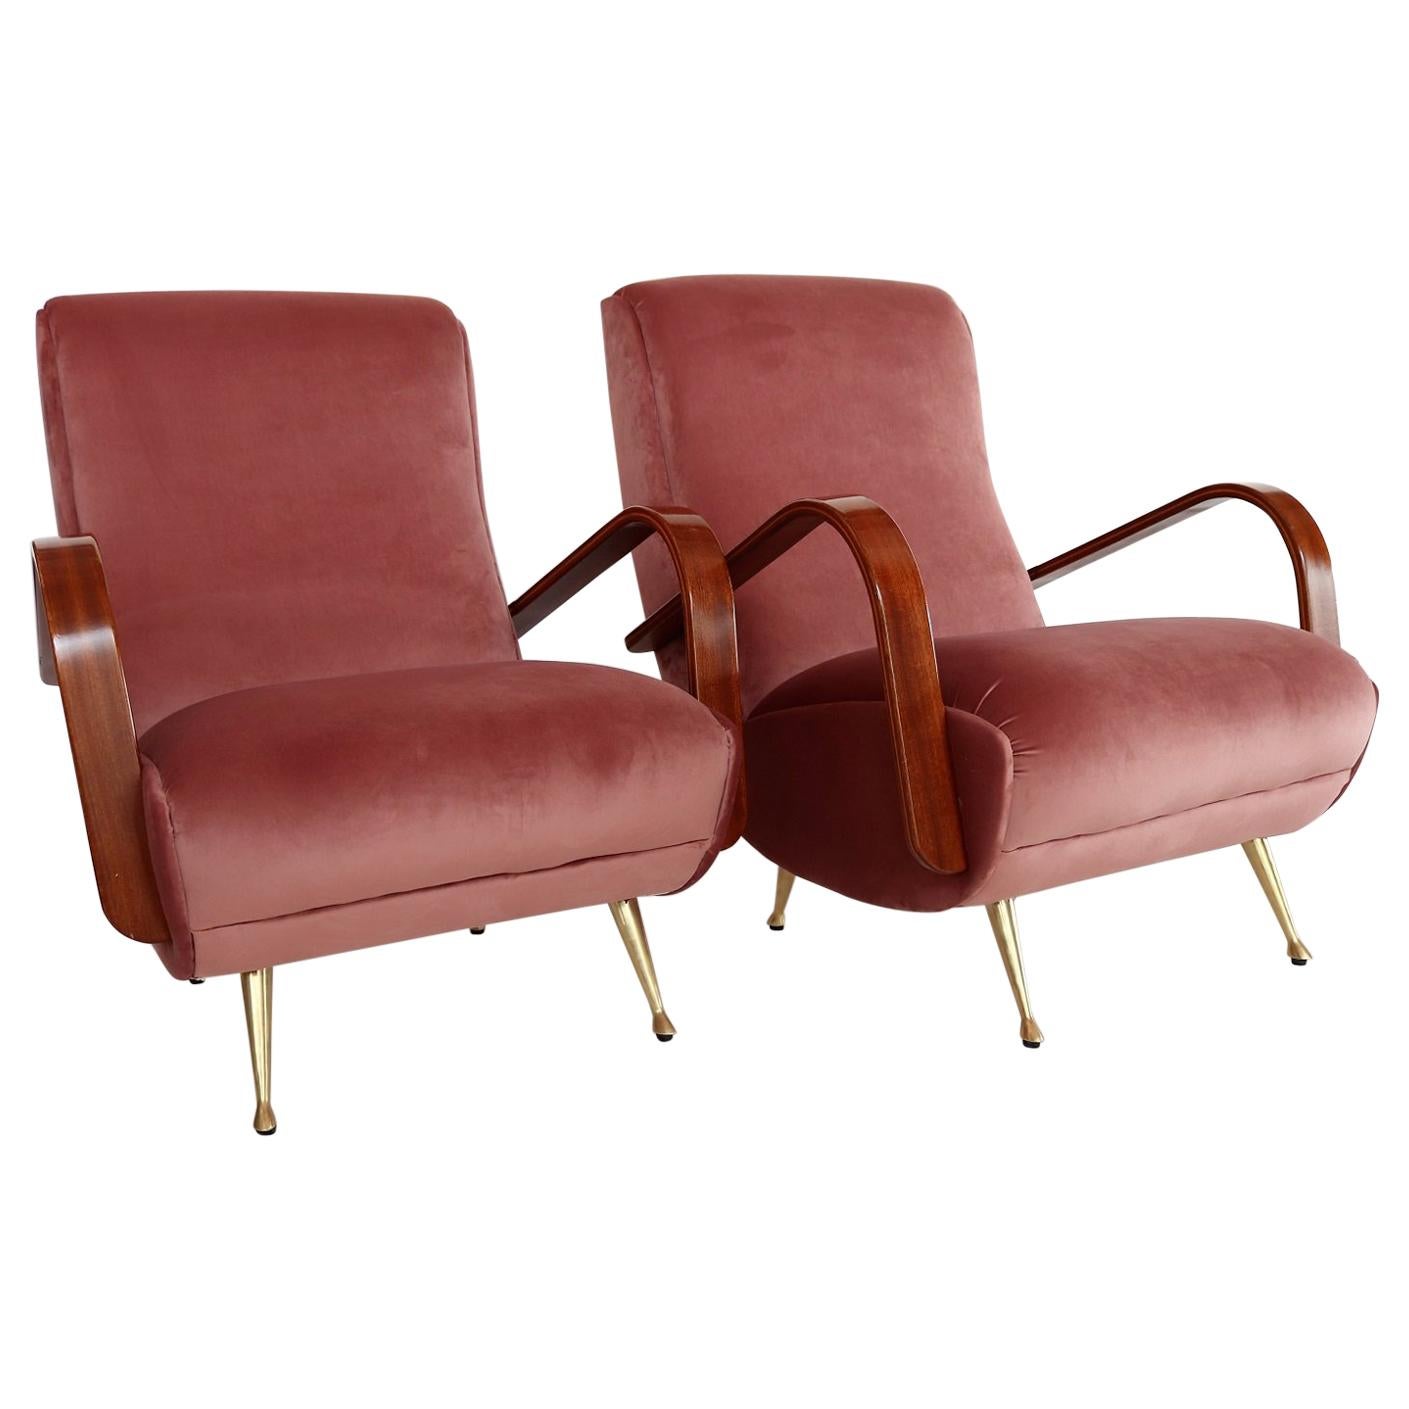 Italian Midcentury Armchairs in Mahogany, Brass and Coral Red Velvet, 1950s